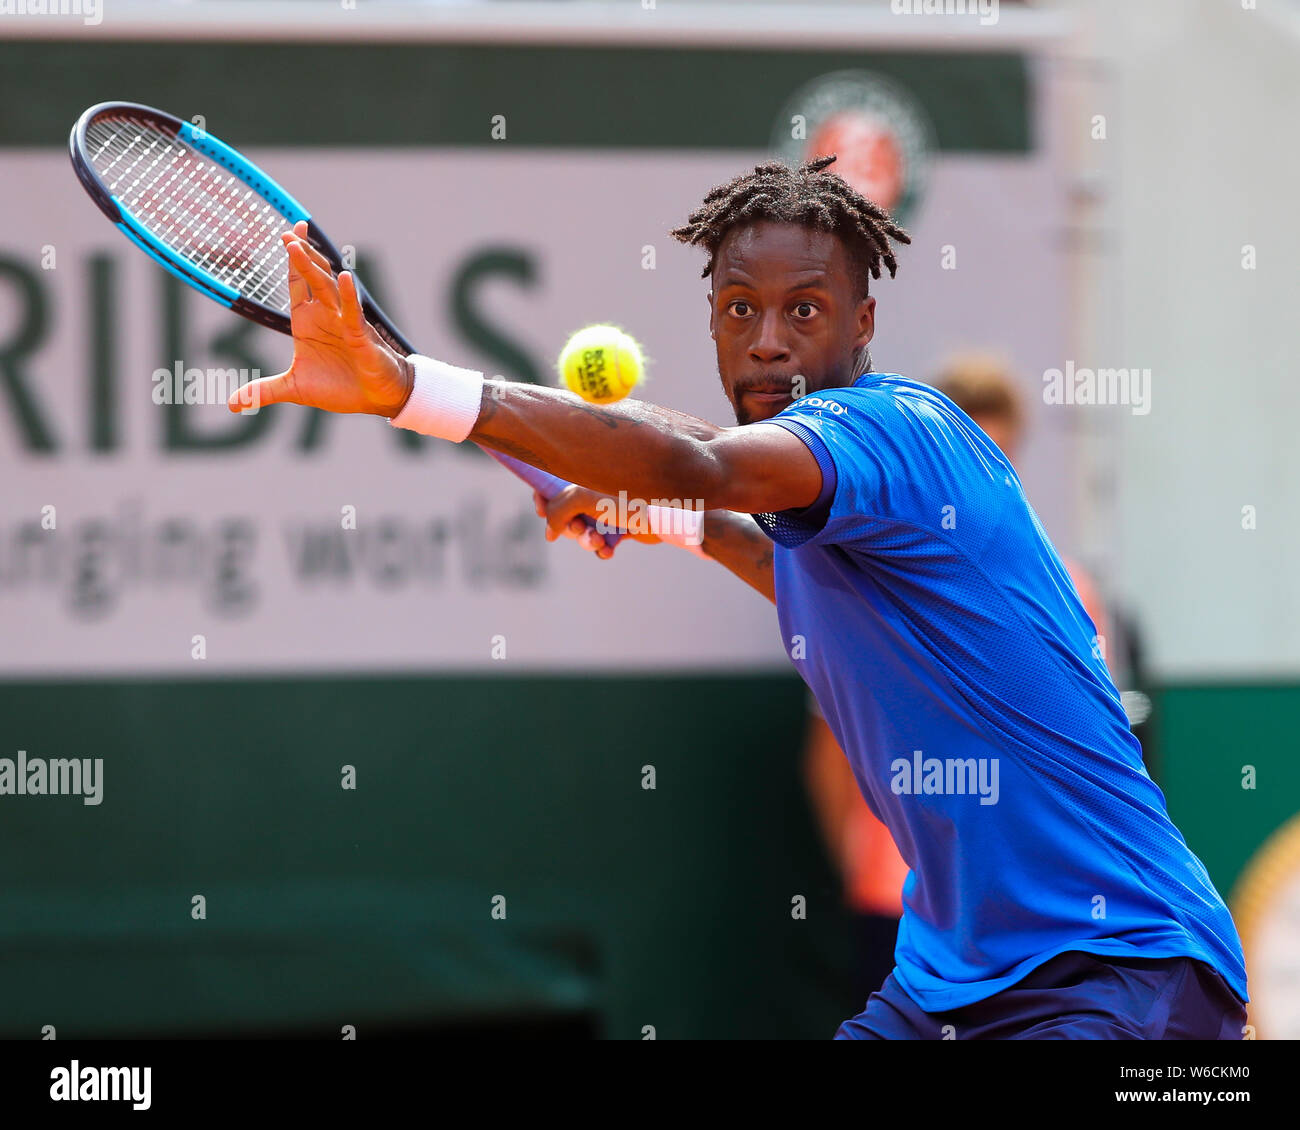 French tennis player Gael Monfils playing forehand shot in French Open 2019  tennis tournament, Paris, France Stock Photo - Alamy